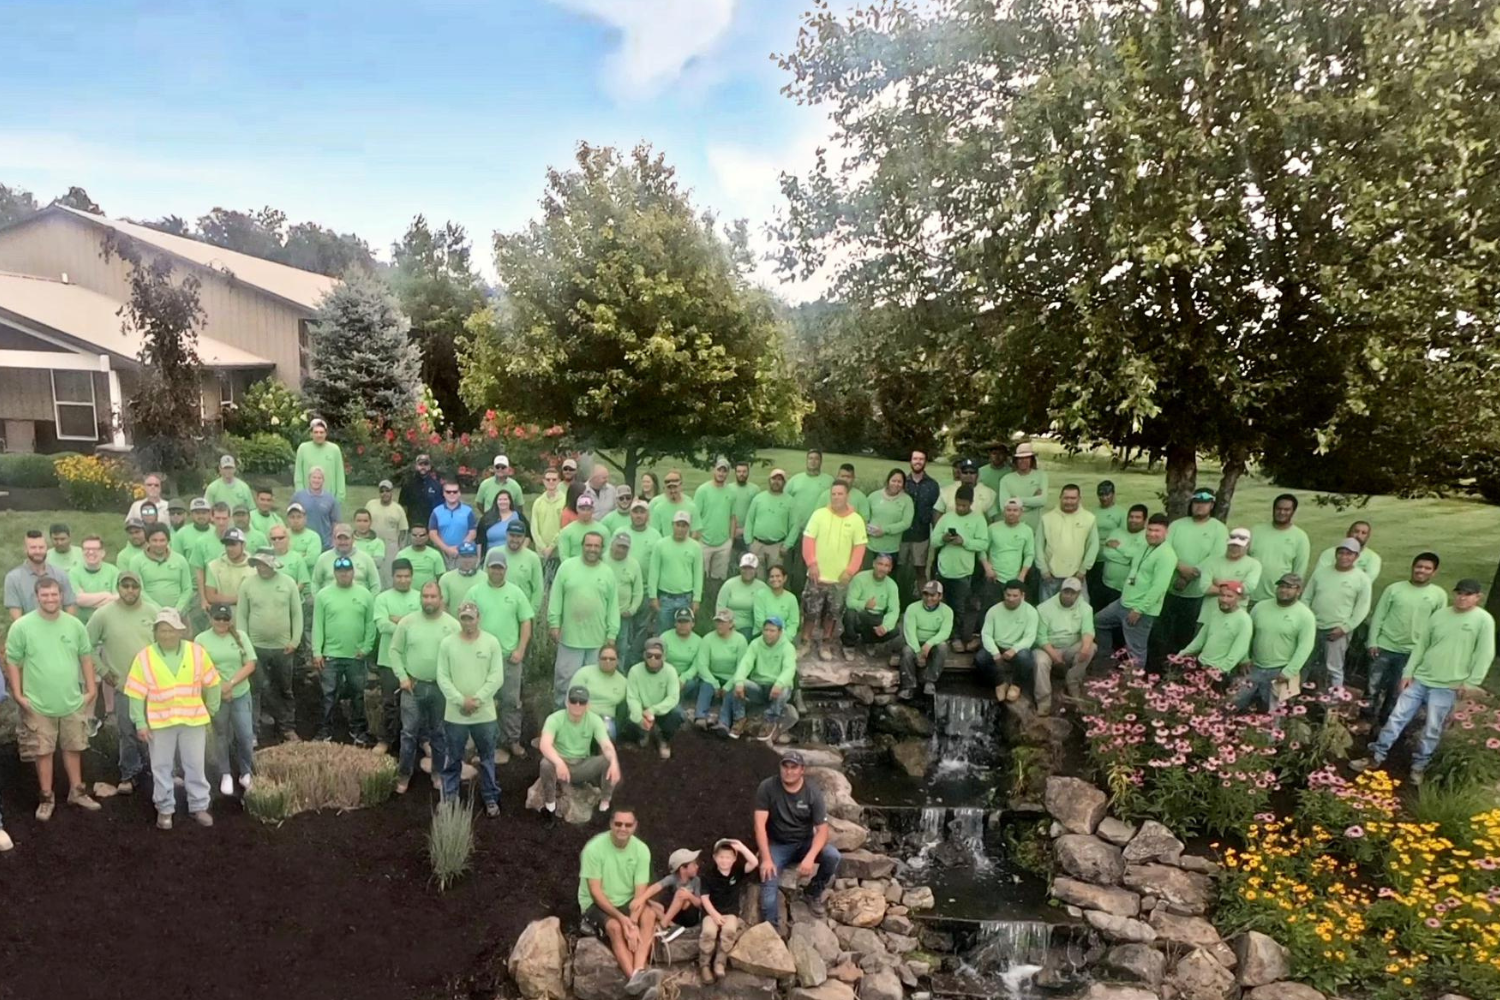 Recruiting & Retaining Talent in the Landscaping Industry